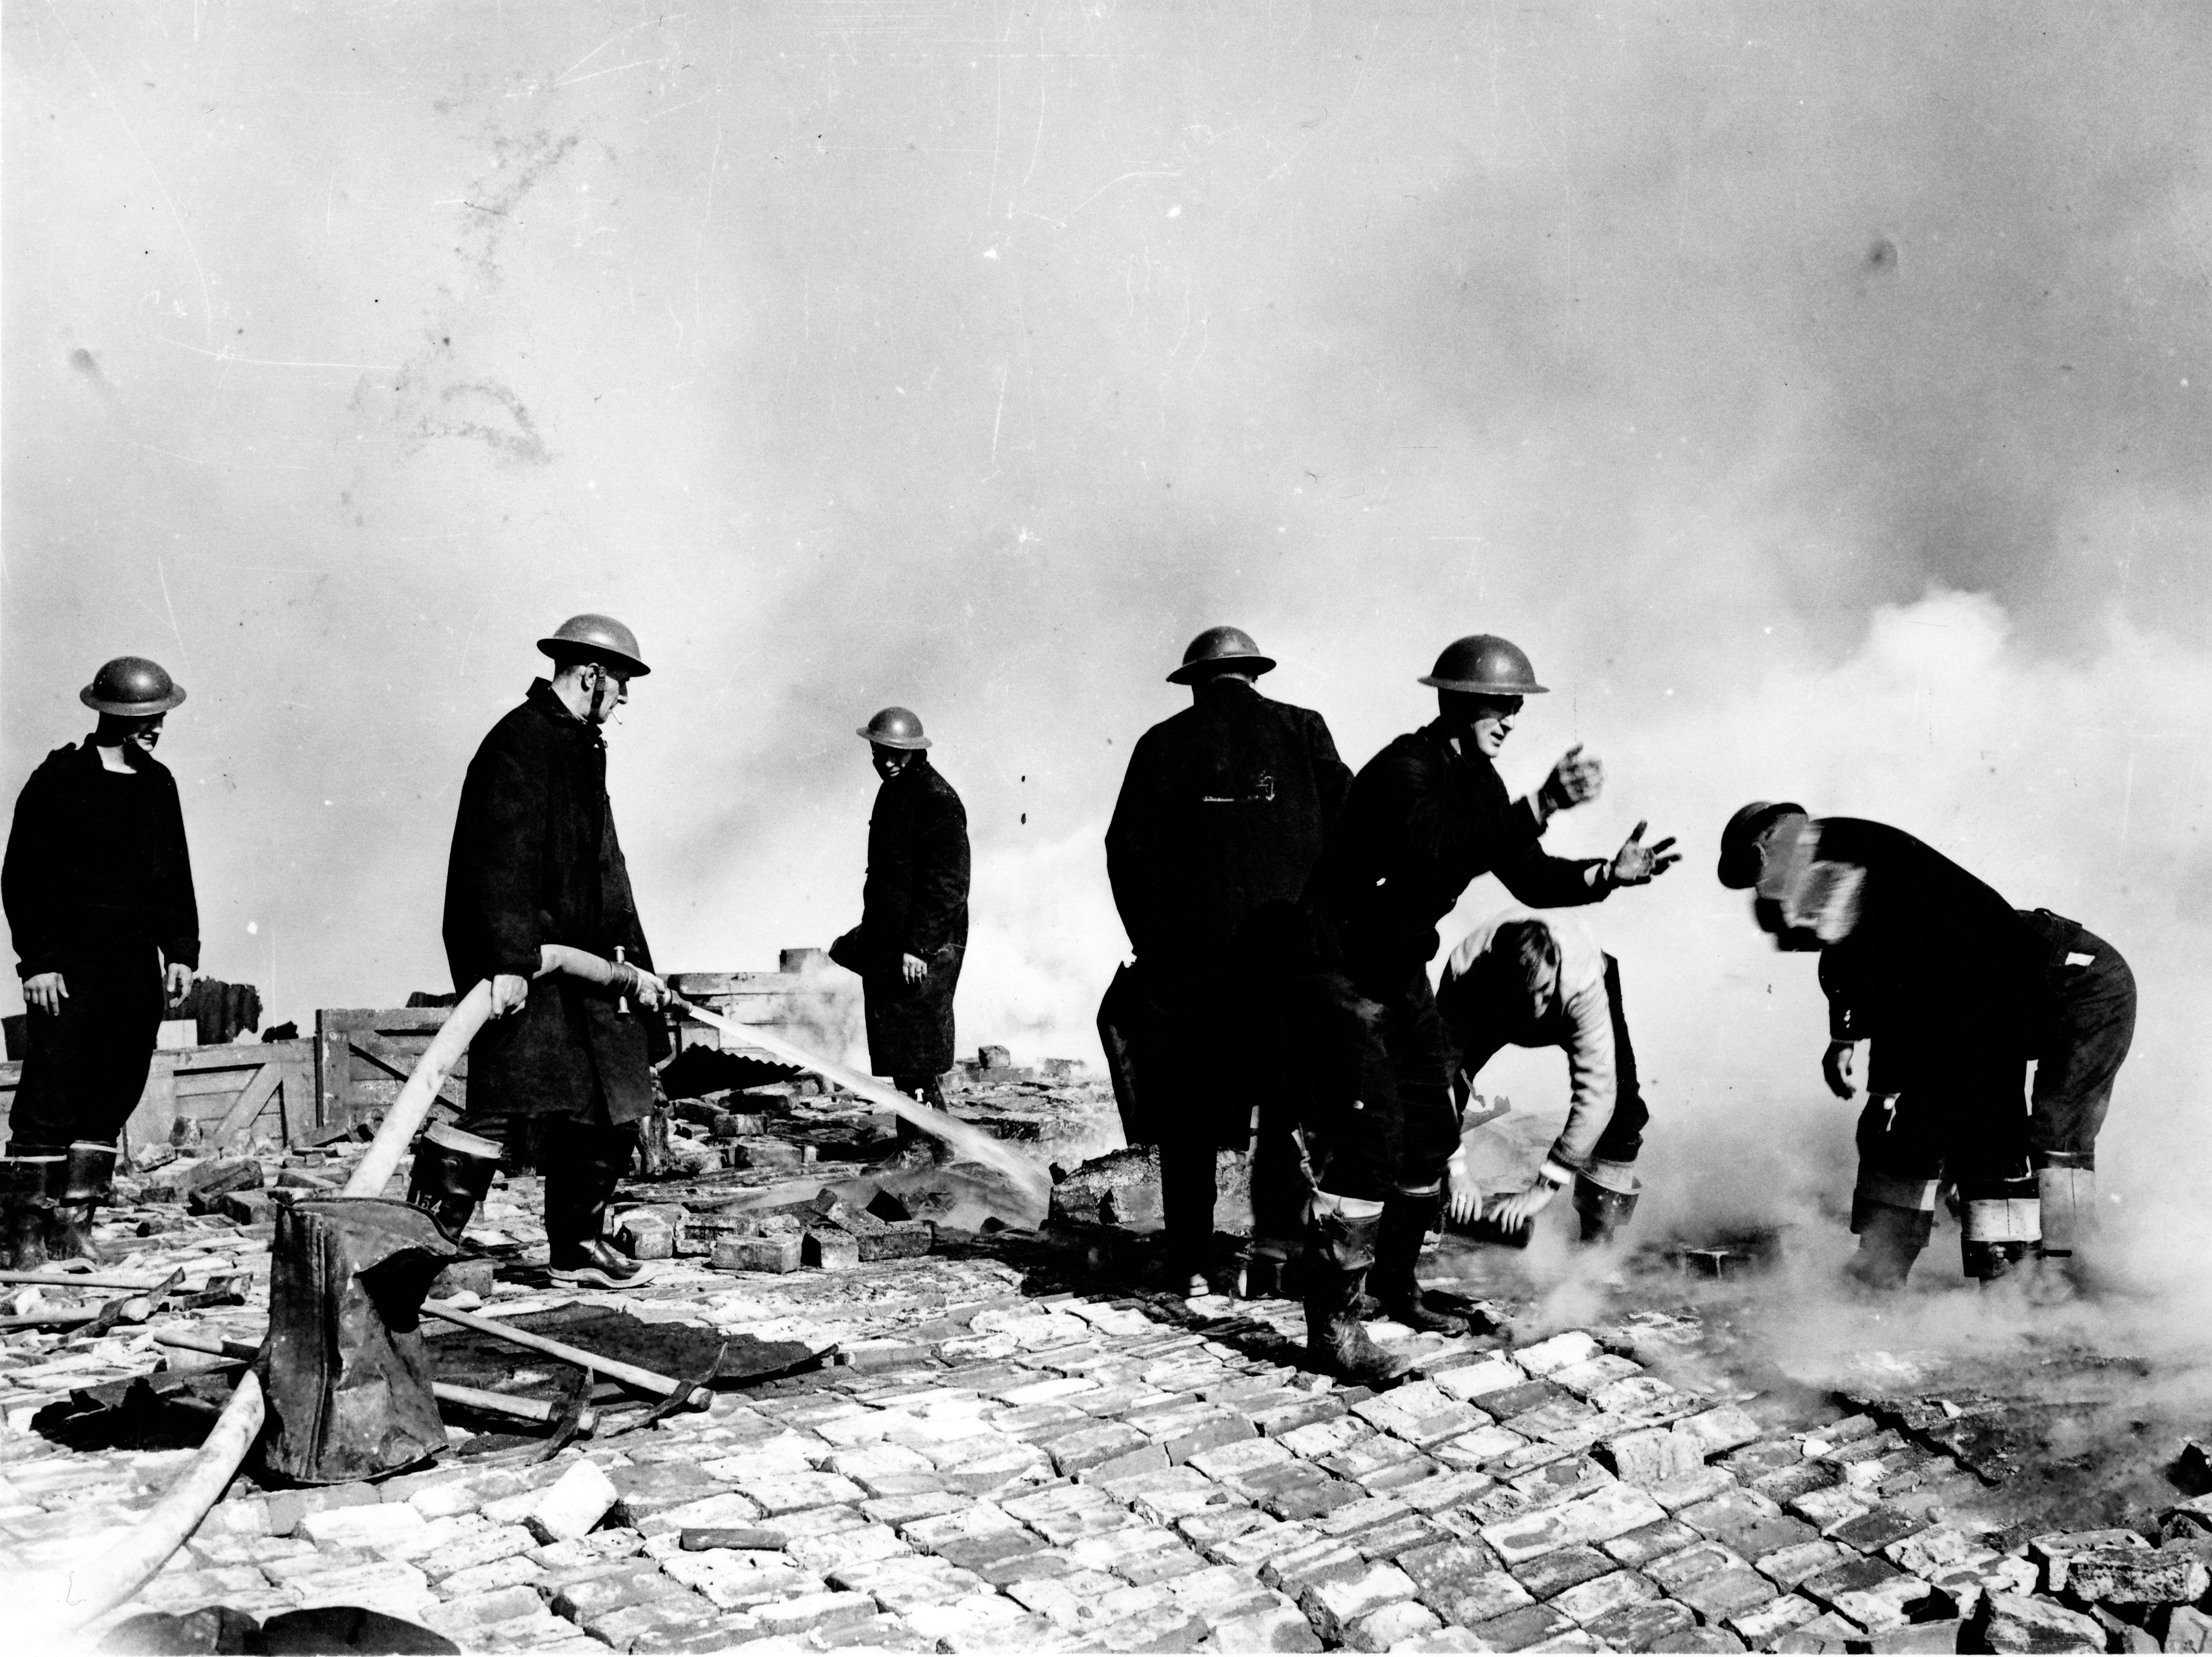 What looks to be eight firefighters in the streets, which are ablaze. They are in full uniform (jumpsuits and helmets). One is holding a hose, one is reaching to catch something, two are stood looking around and others are crouched down handling bricks.